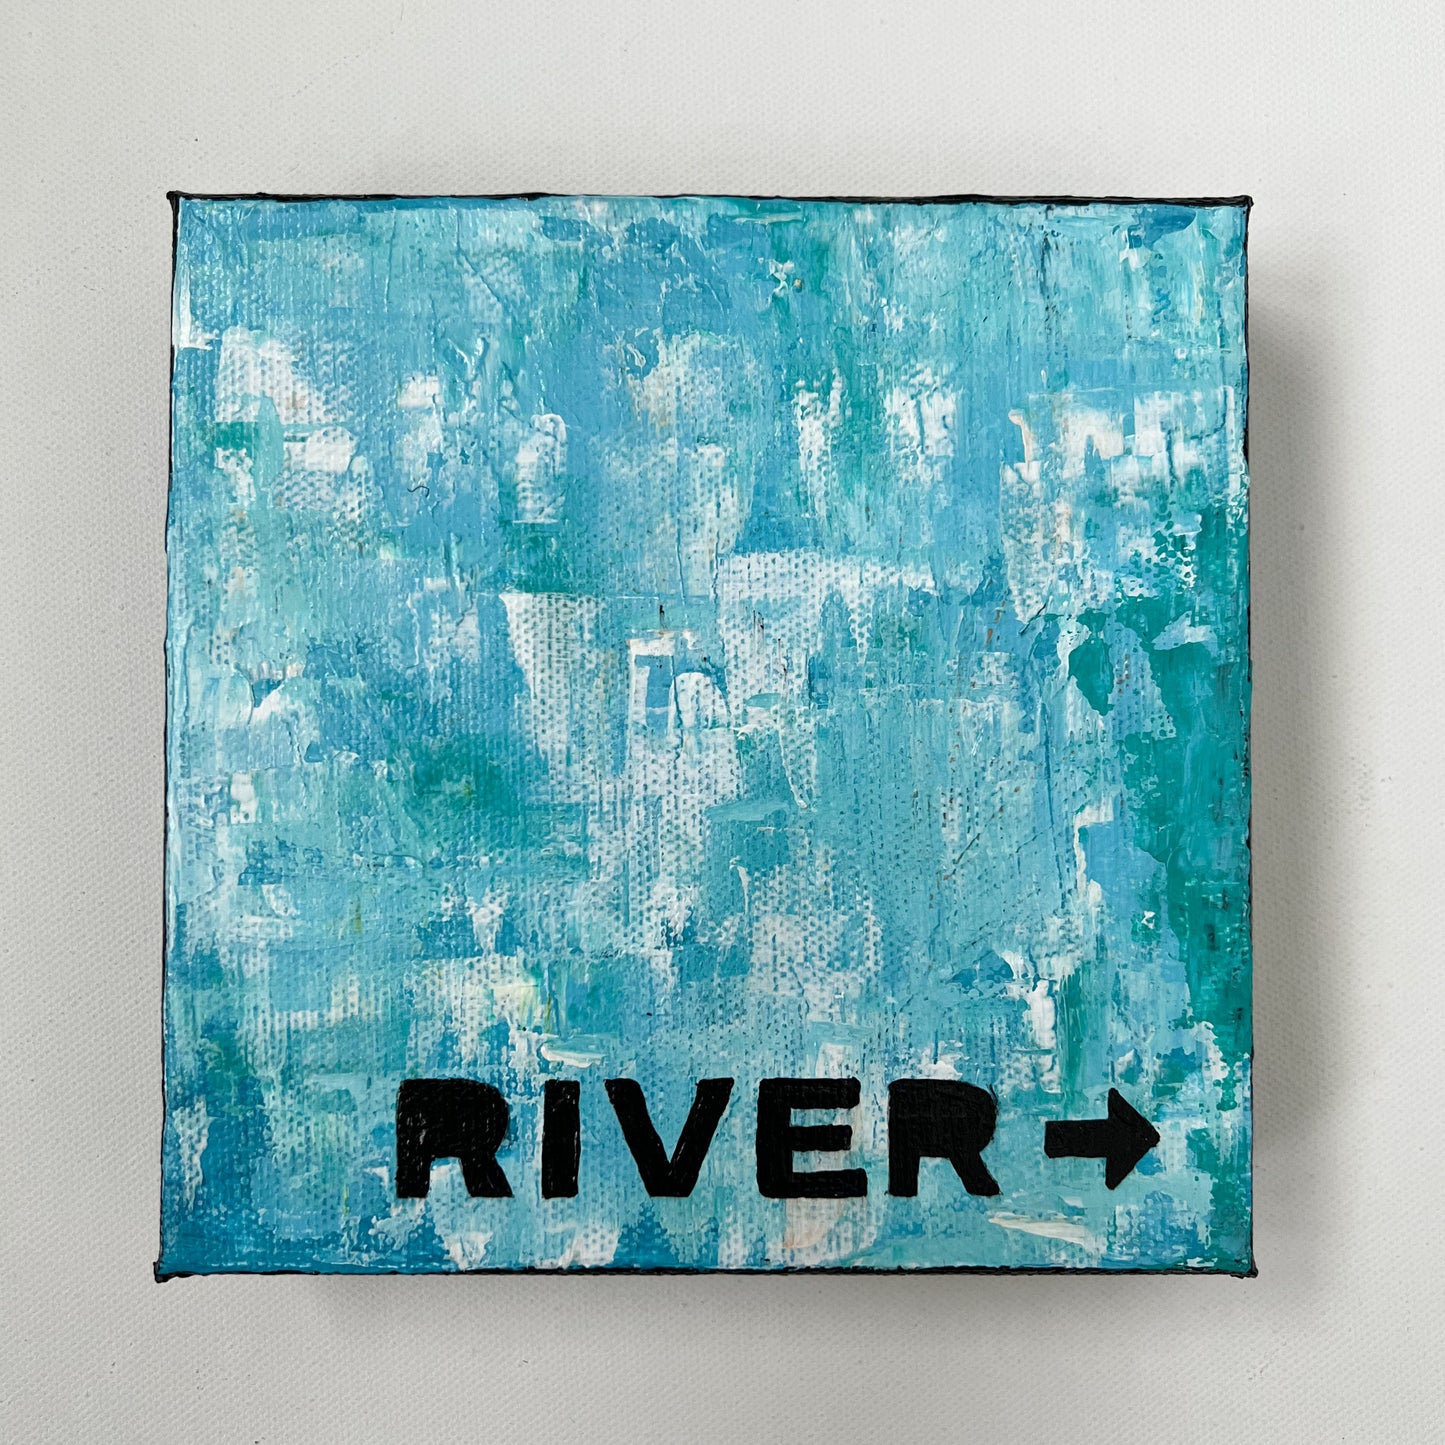 To The River, 6x6"